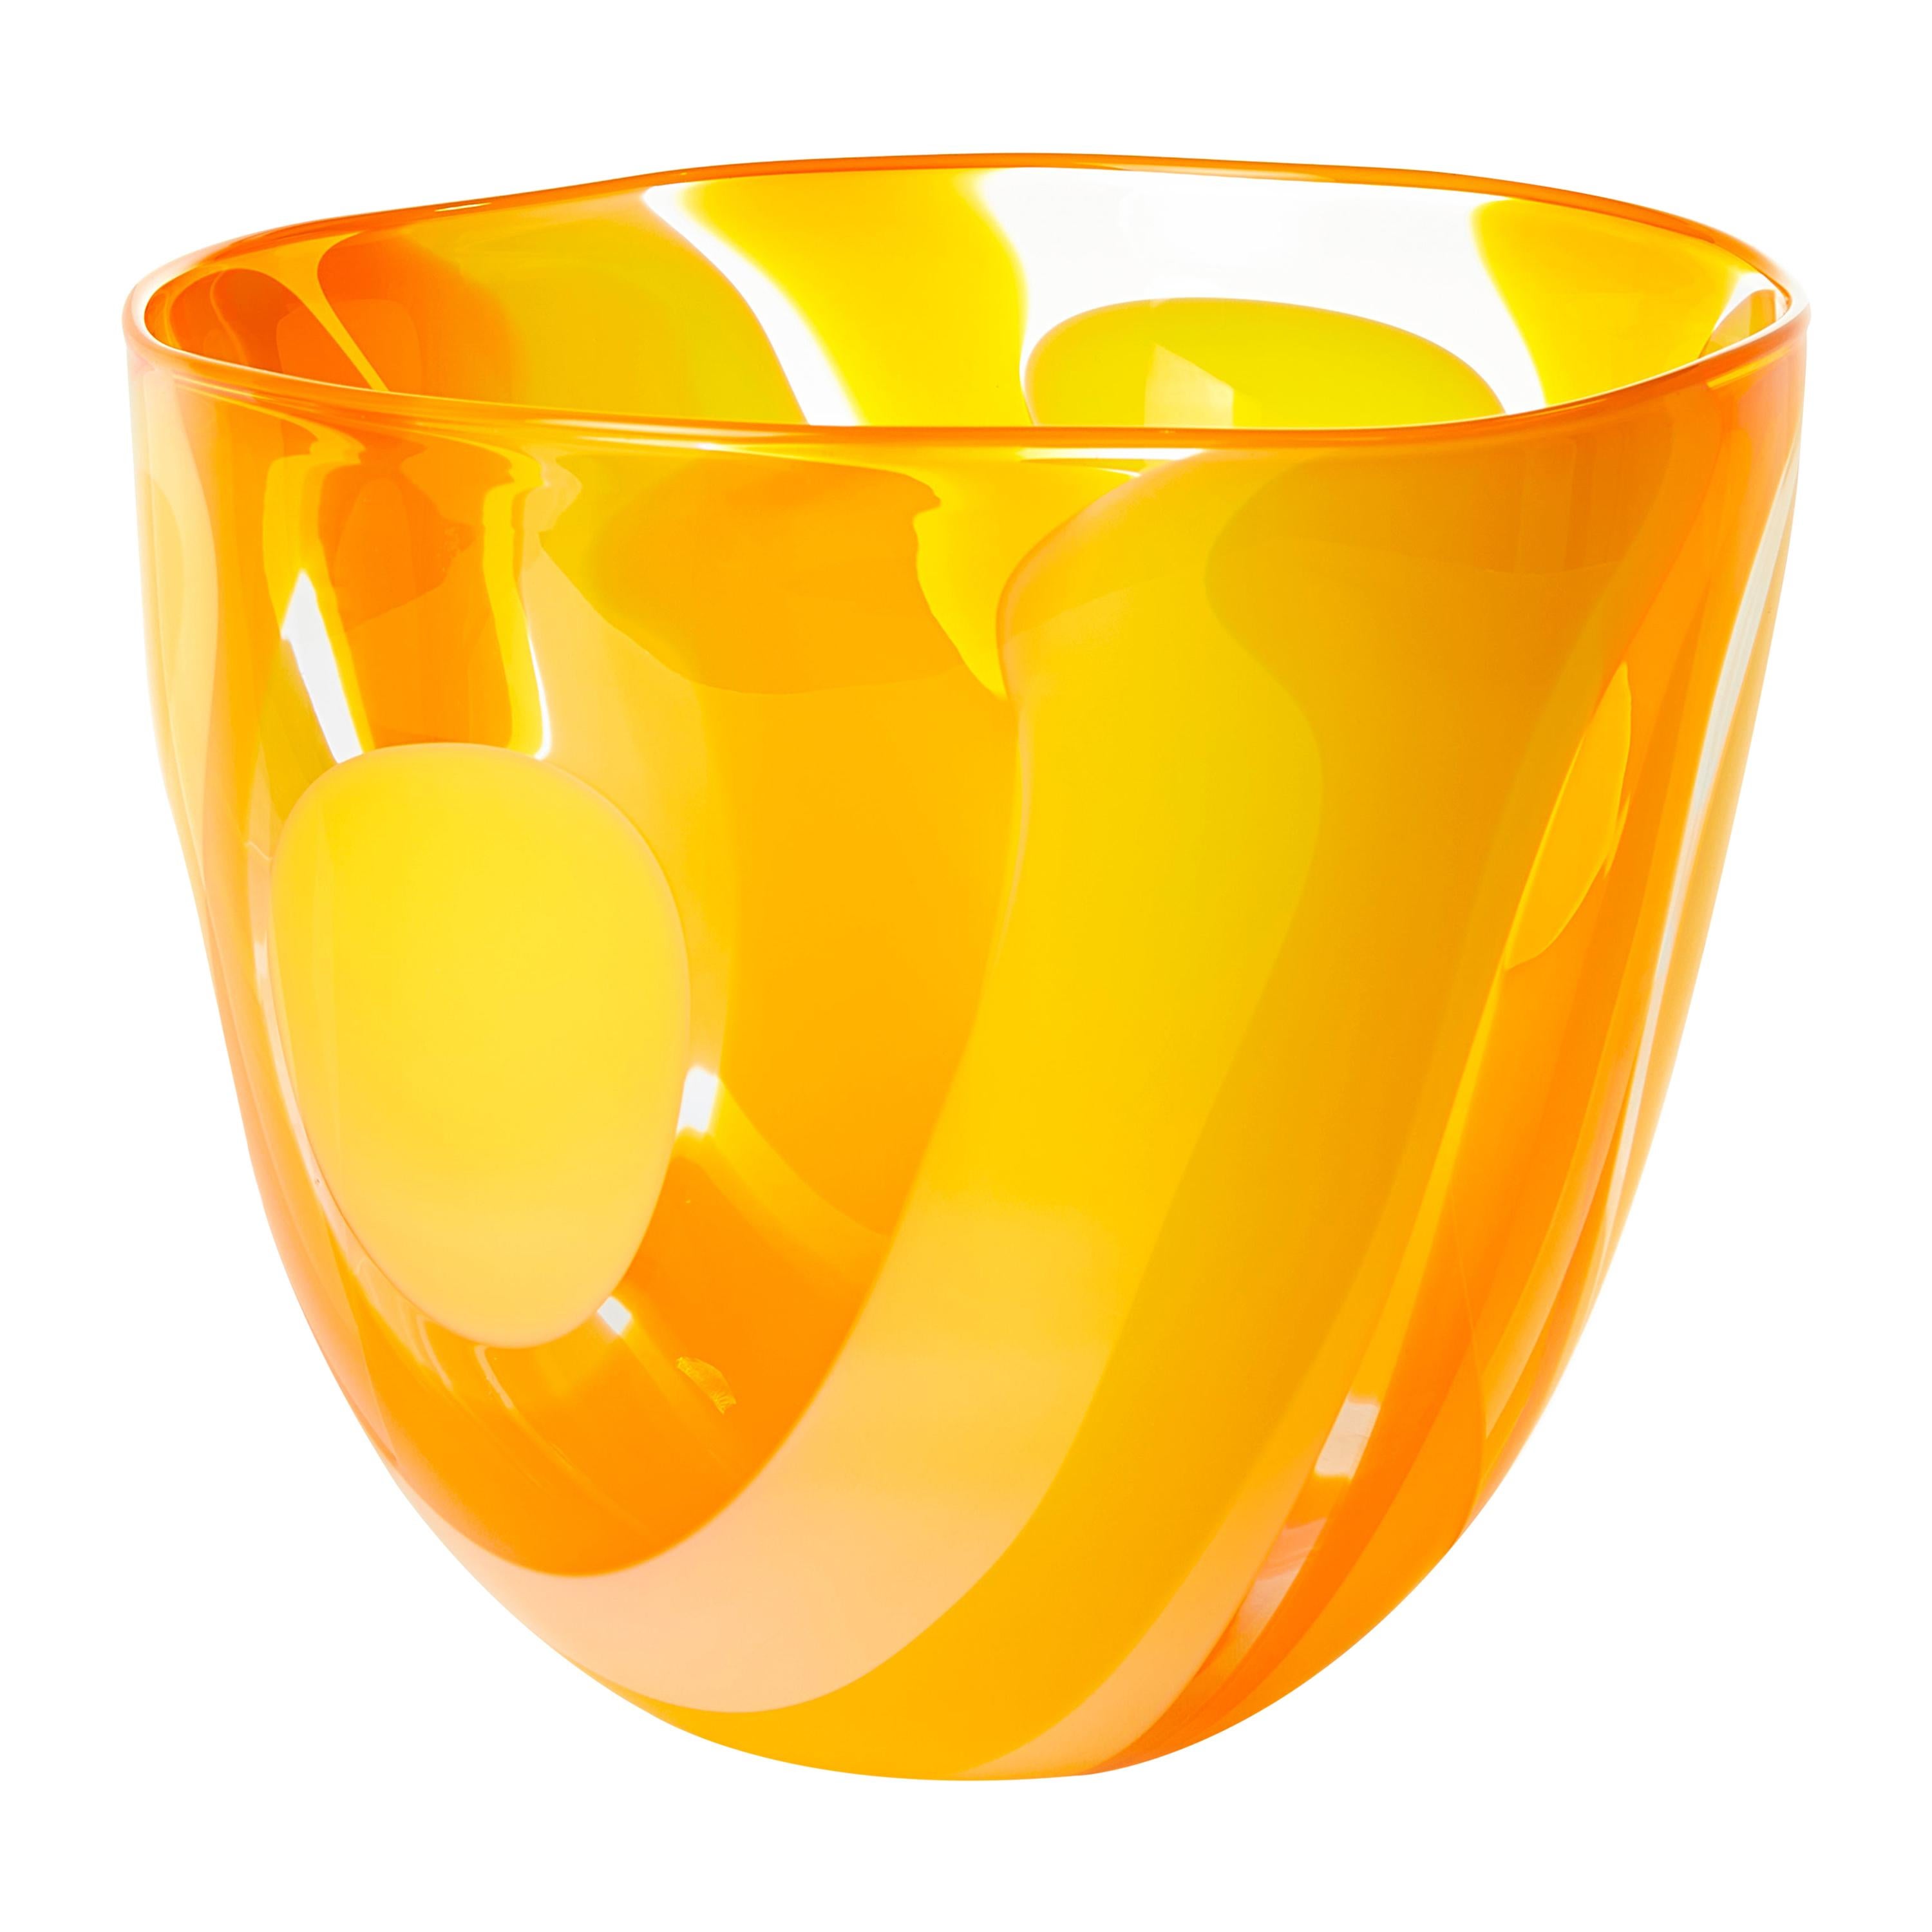 Waves in Yellow and Orange, a Unique Glass Bowl / Centrepiece by Neil Wilkin 